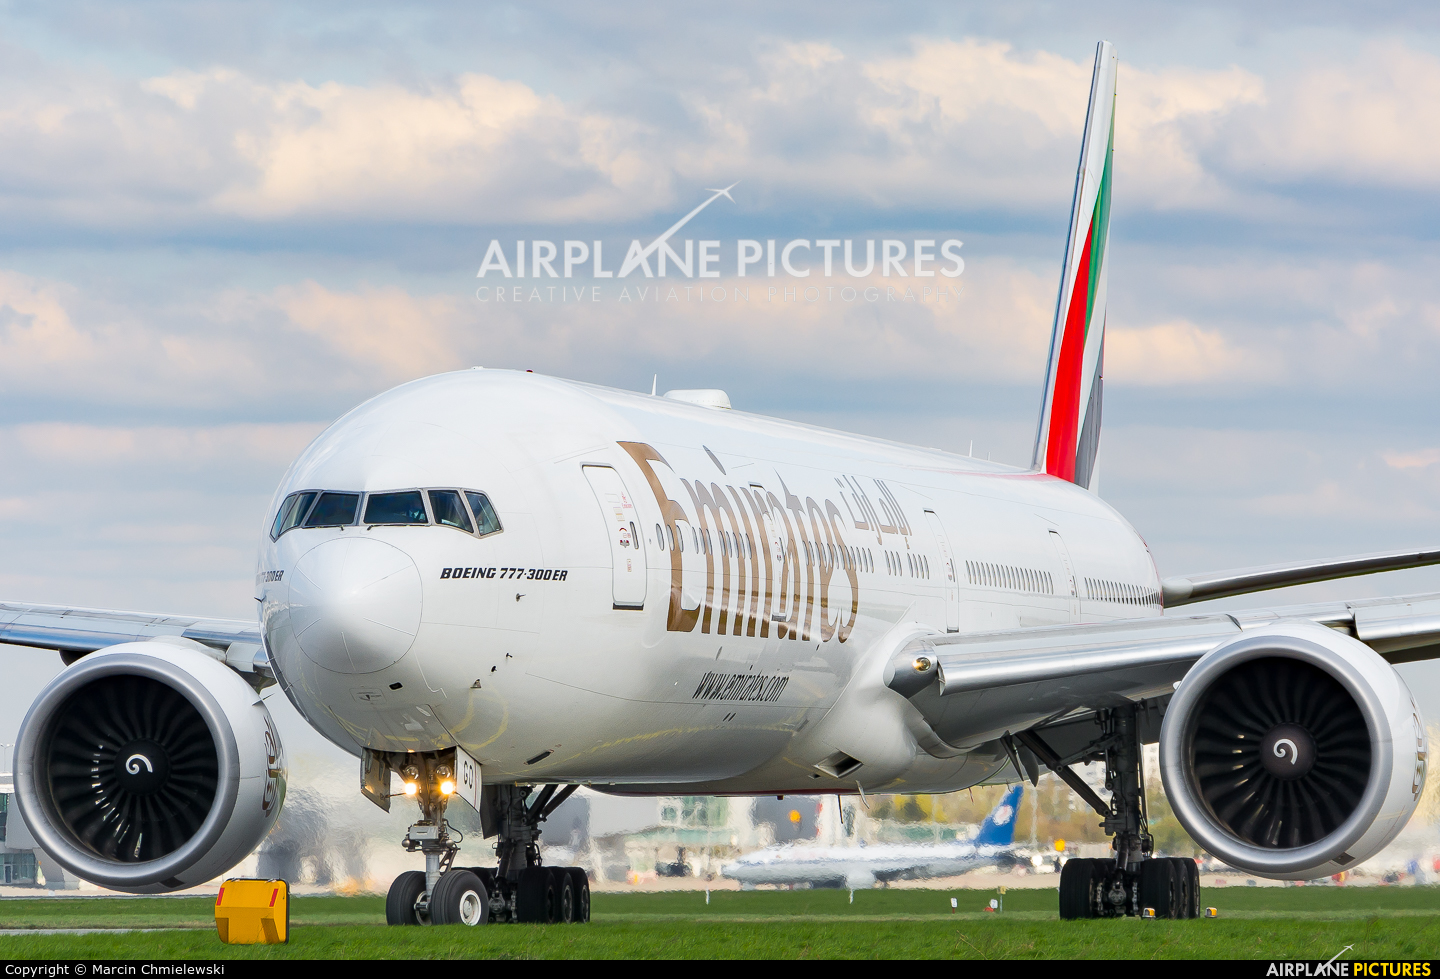 Emirates Airlines A6-EGO aircraft at Warsaw - Frederic Chopin